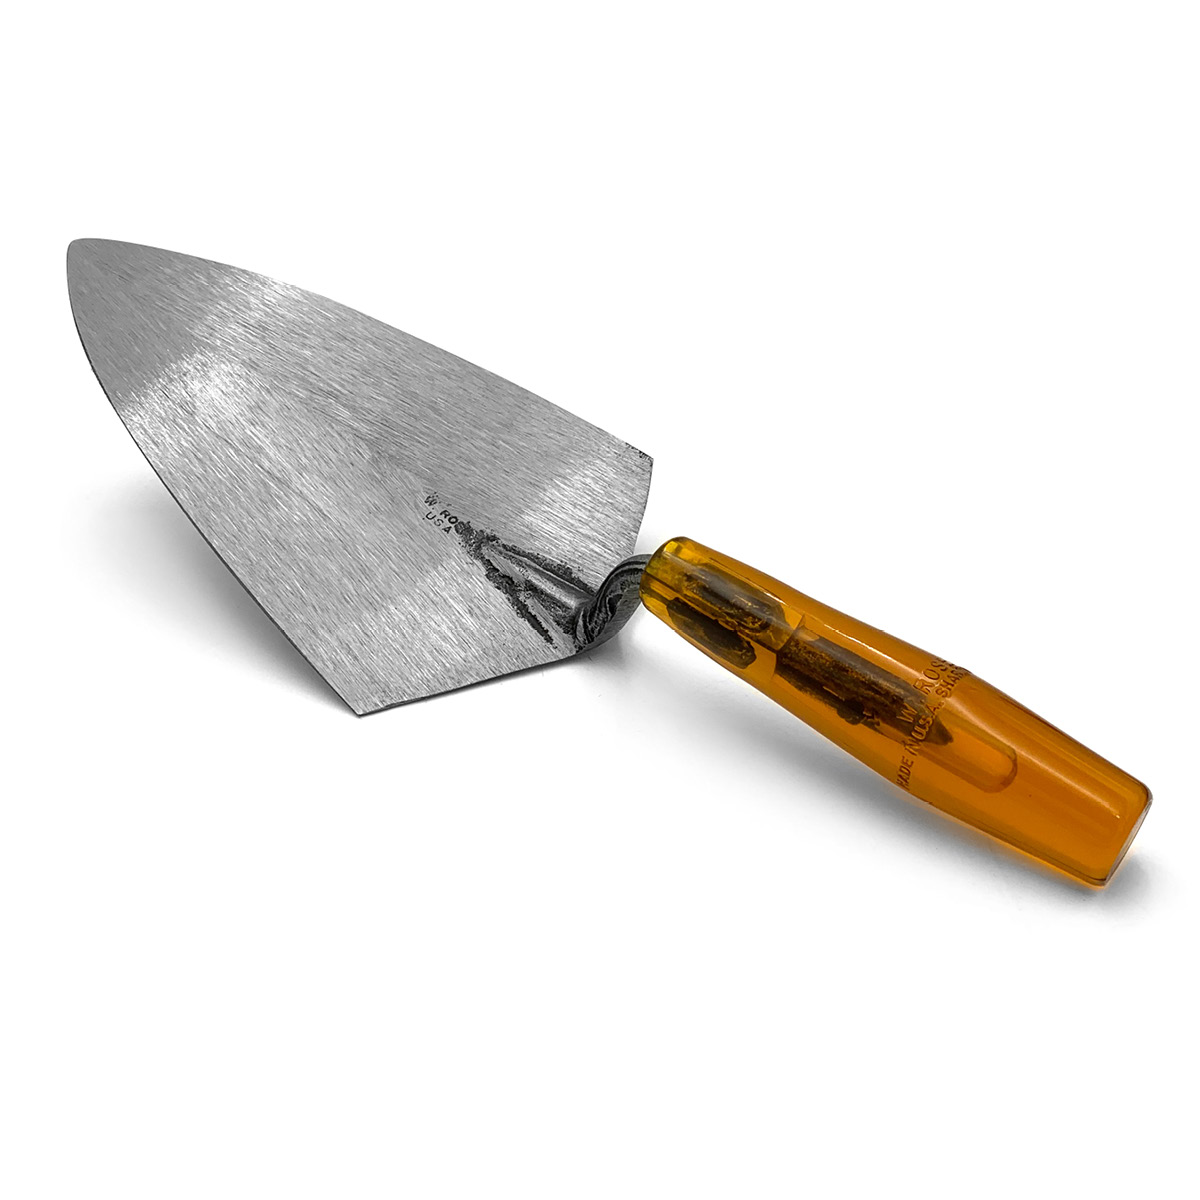 W.rose Trowels made from a single piece of specially forged steel for extra strength. These American made trowels can be purchased in the United Kingdom via Speedcrete who sell masonry professional tools.